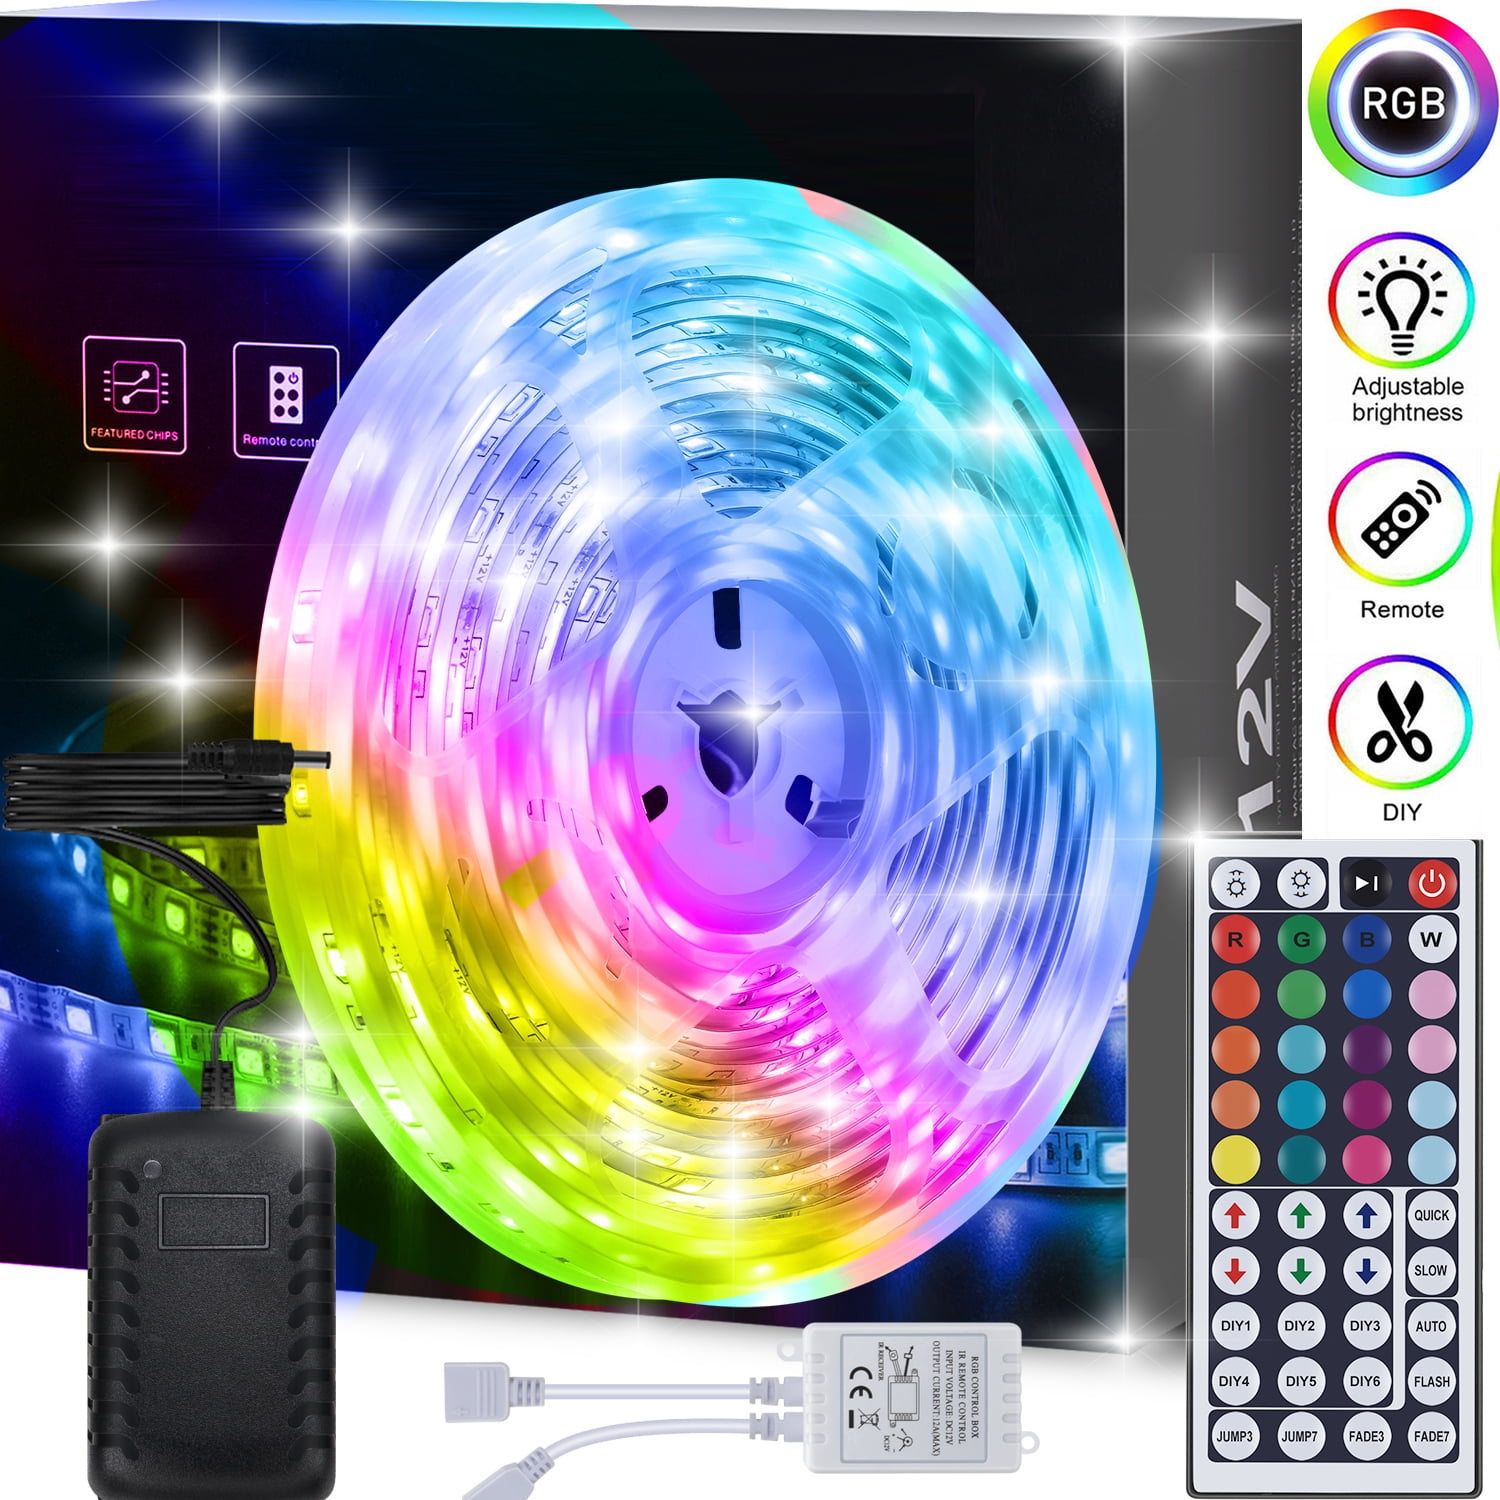 Remote Control Design No Glare for Room Bars Cafes Recording Studio Many Modes On Air Led Illuminated Sign,Subscribe Multi-Color Lighting USB Charging 